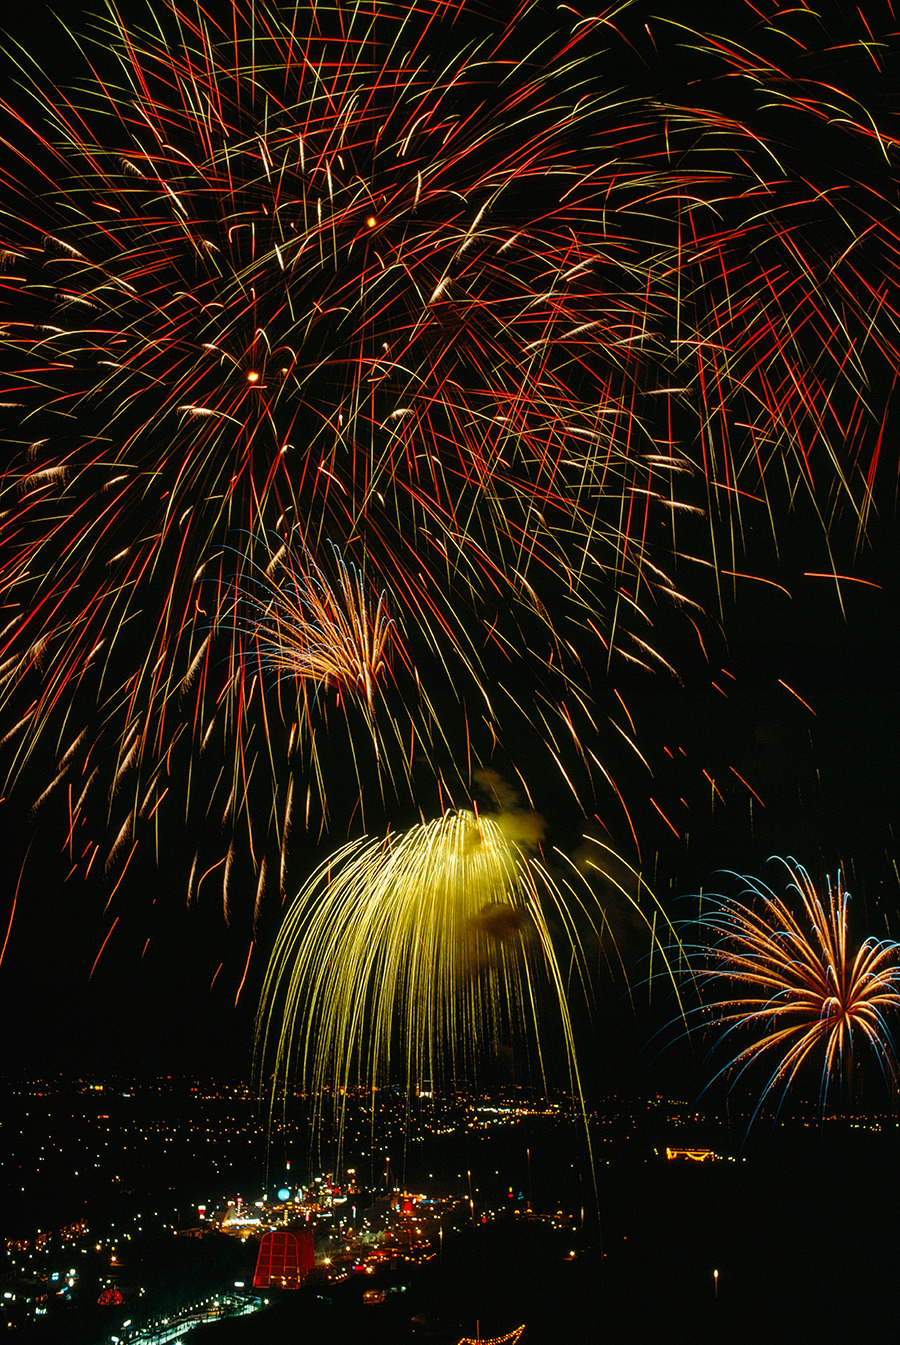 Fireworks erupt in honor of the coronation of Iran&#8217;s Shah, March 1968. Today is National Geographic Found&#8217;s one-year anniversary. Here&#8217;s to a wonderful year filled with incredible and inspiring photographs from the past.Photograph by Winfield Parks, National Geographic